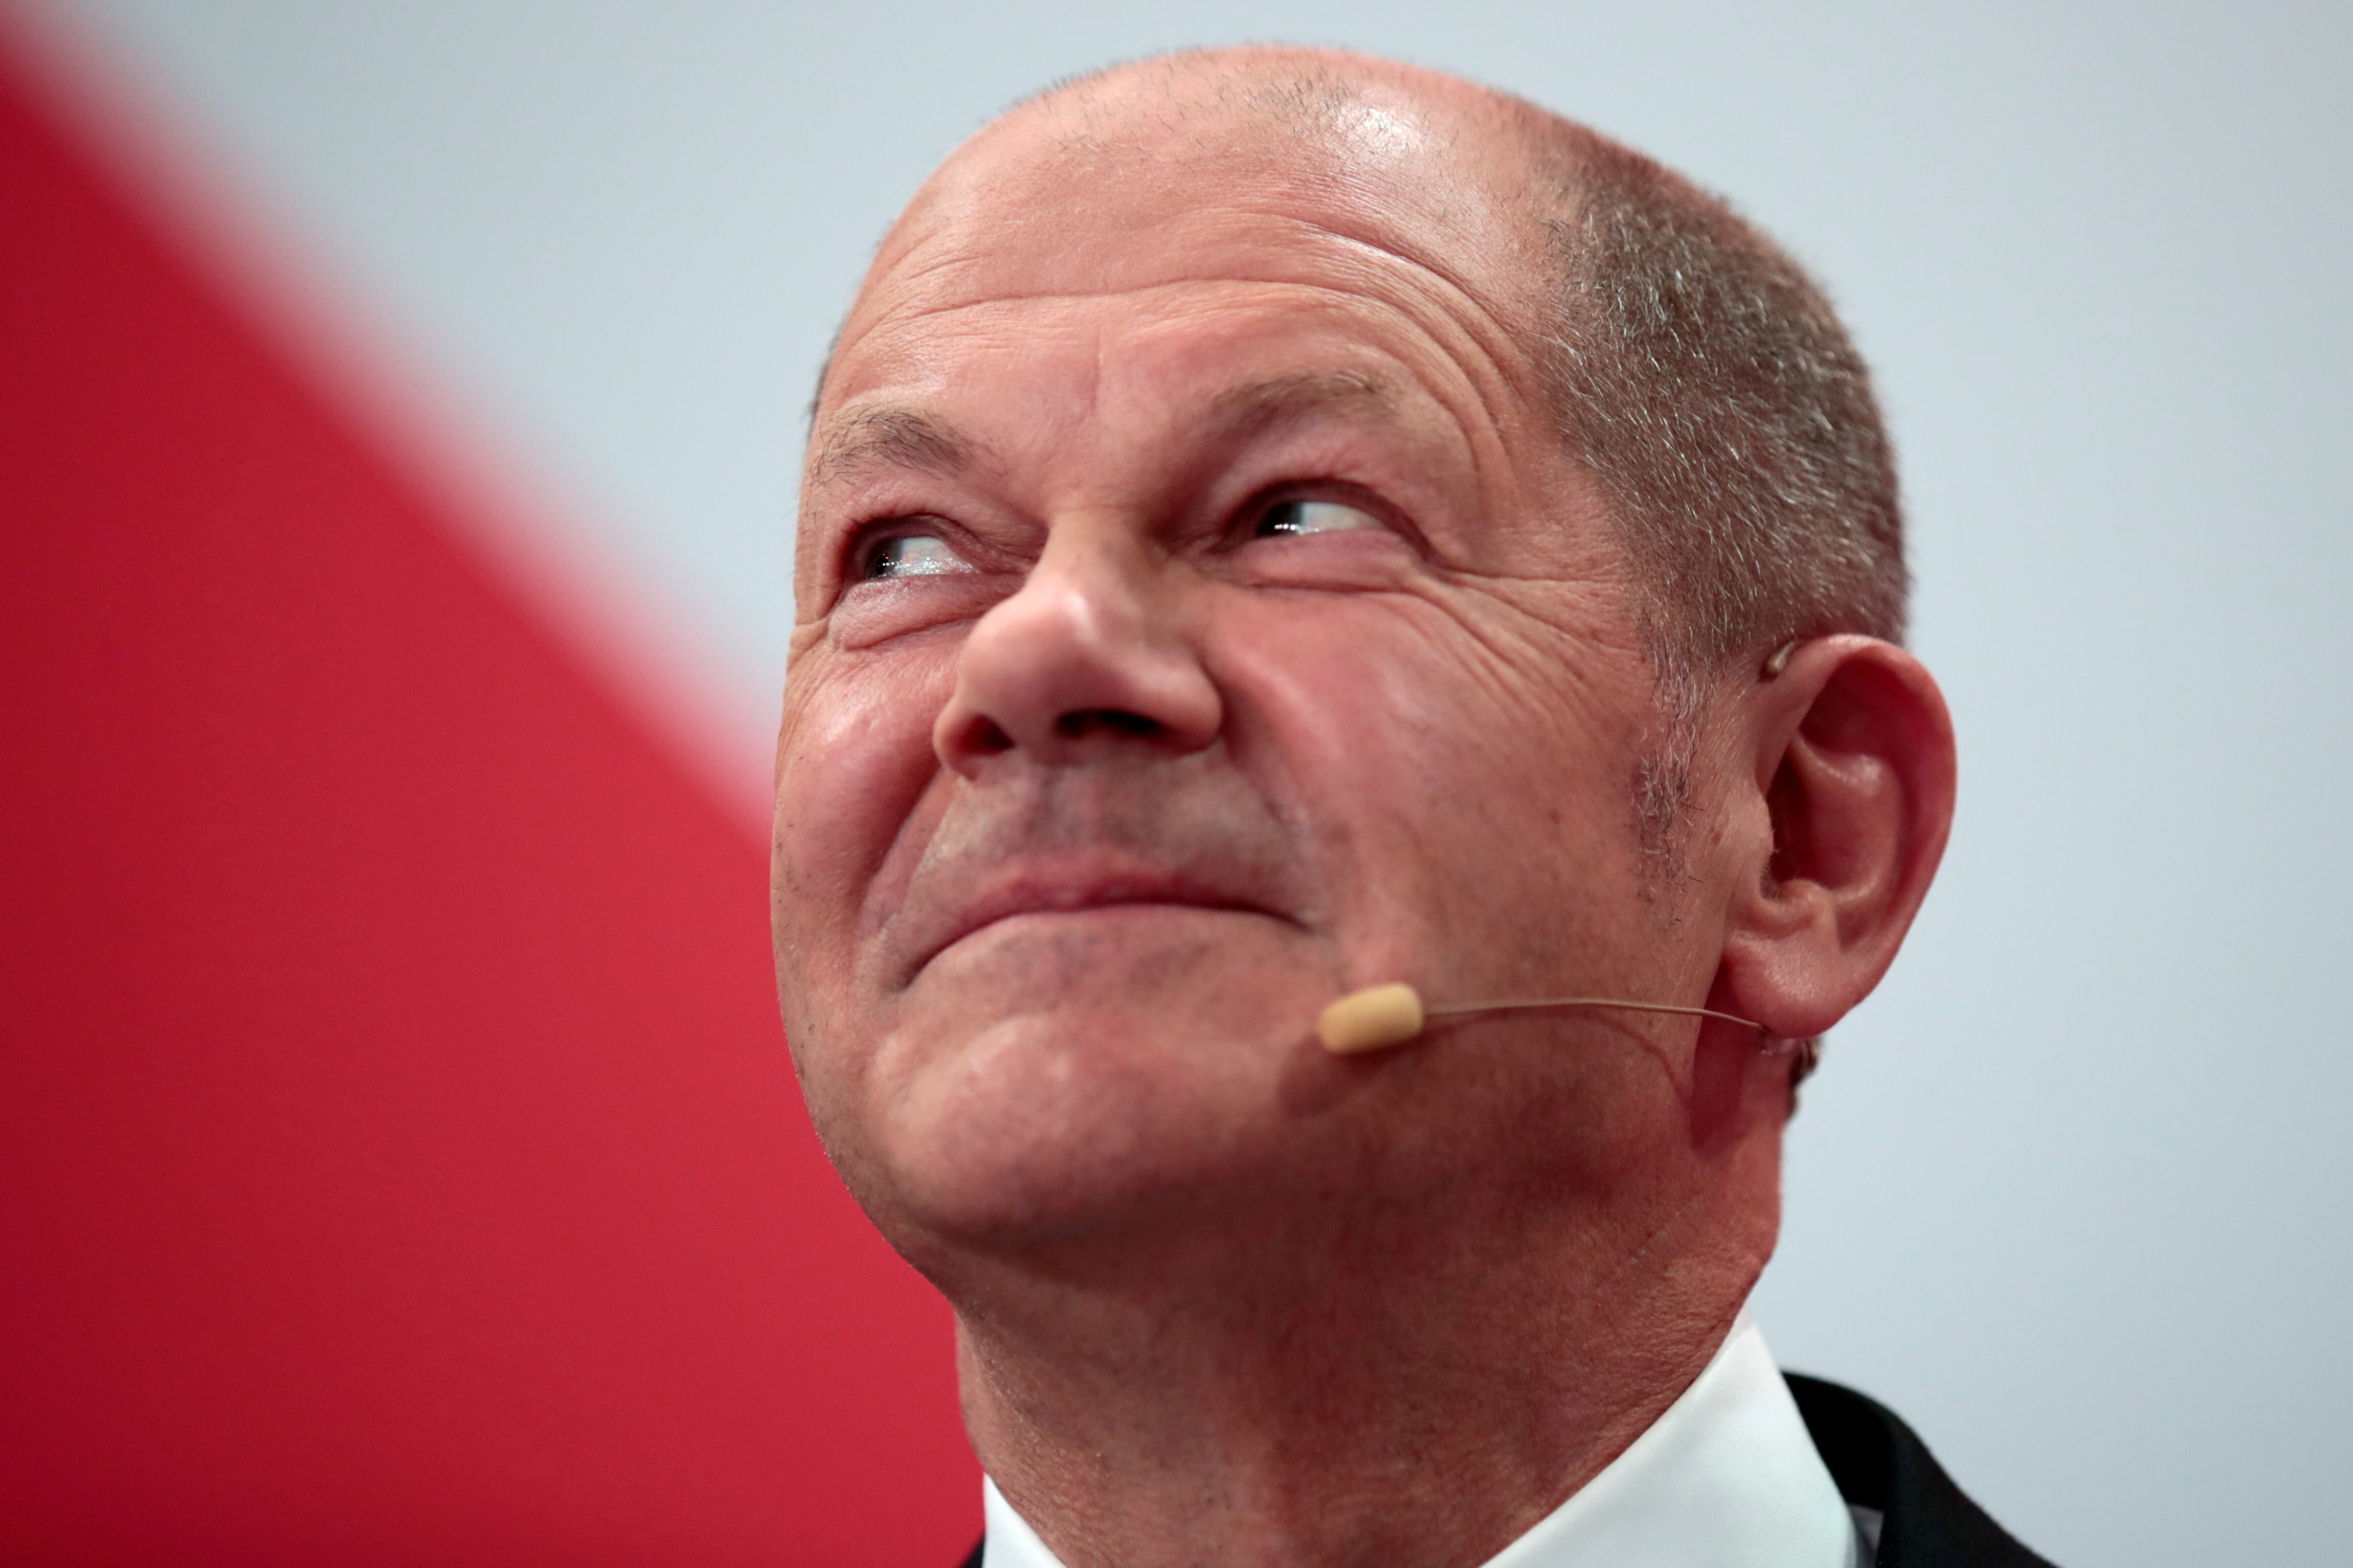 Social Democratic Party’s (SPD) top candidate for chancellor Olaf Scholz. Photo: Reuters